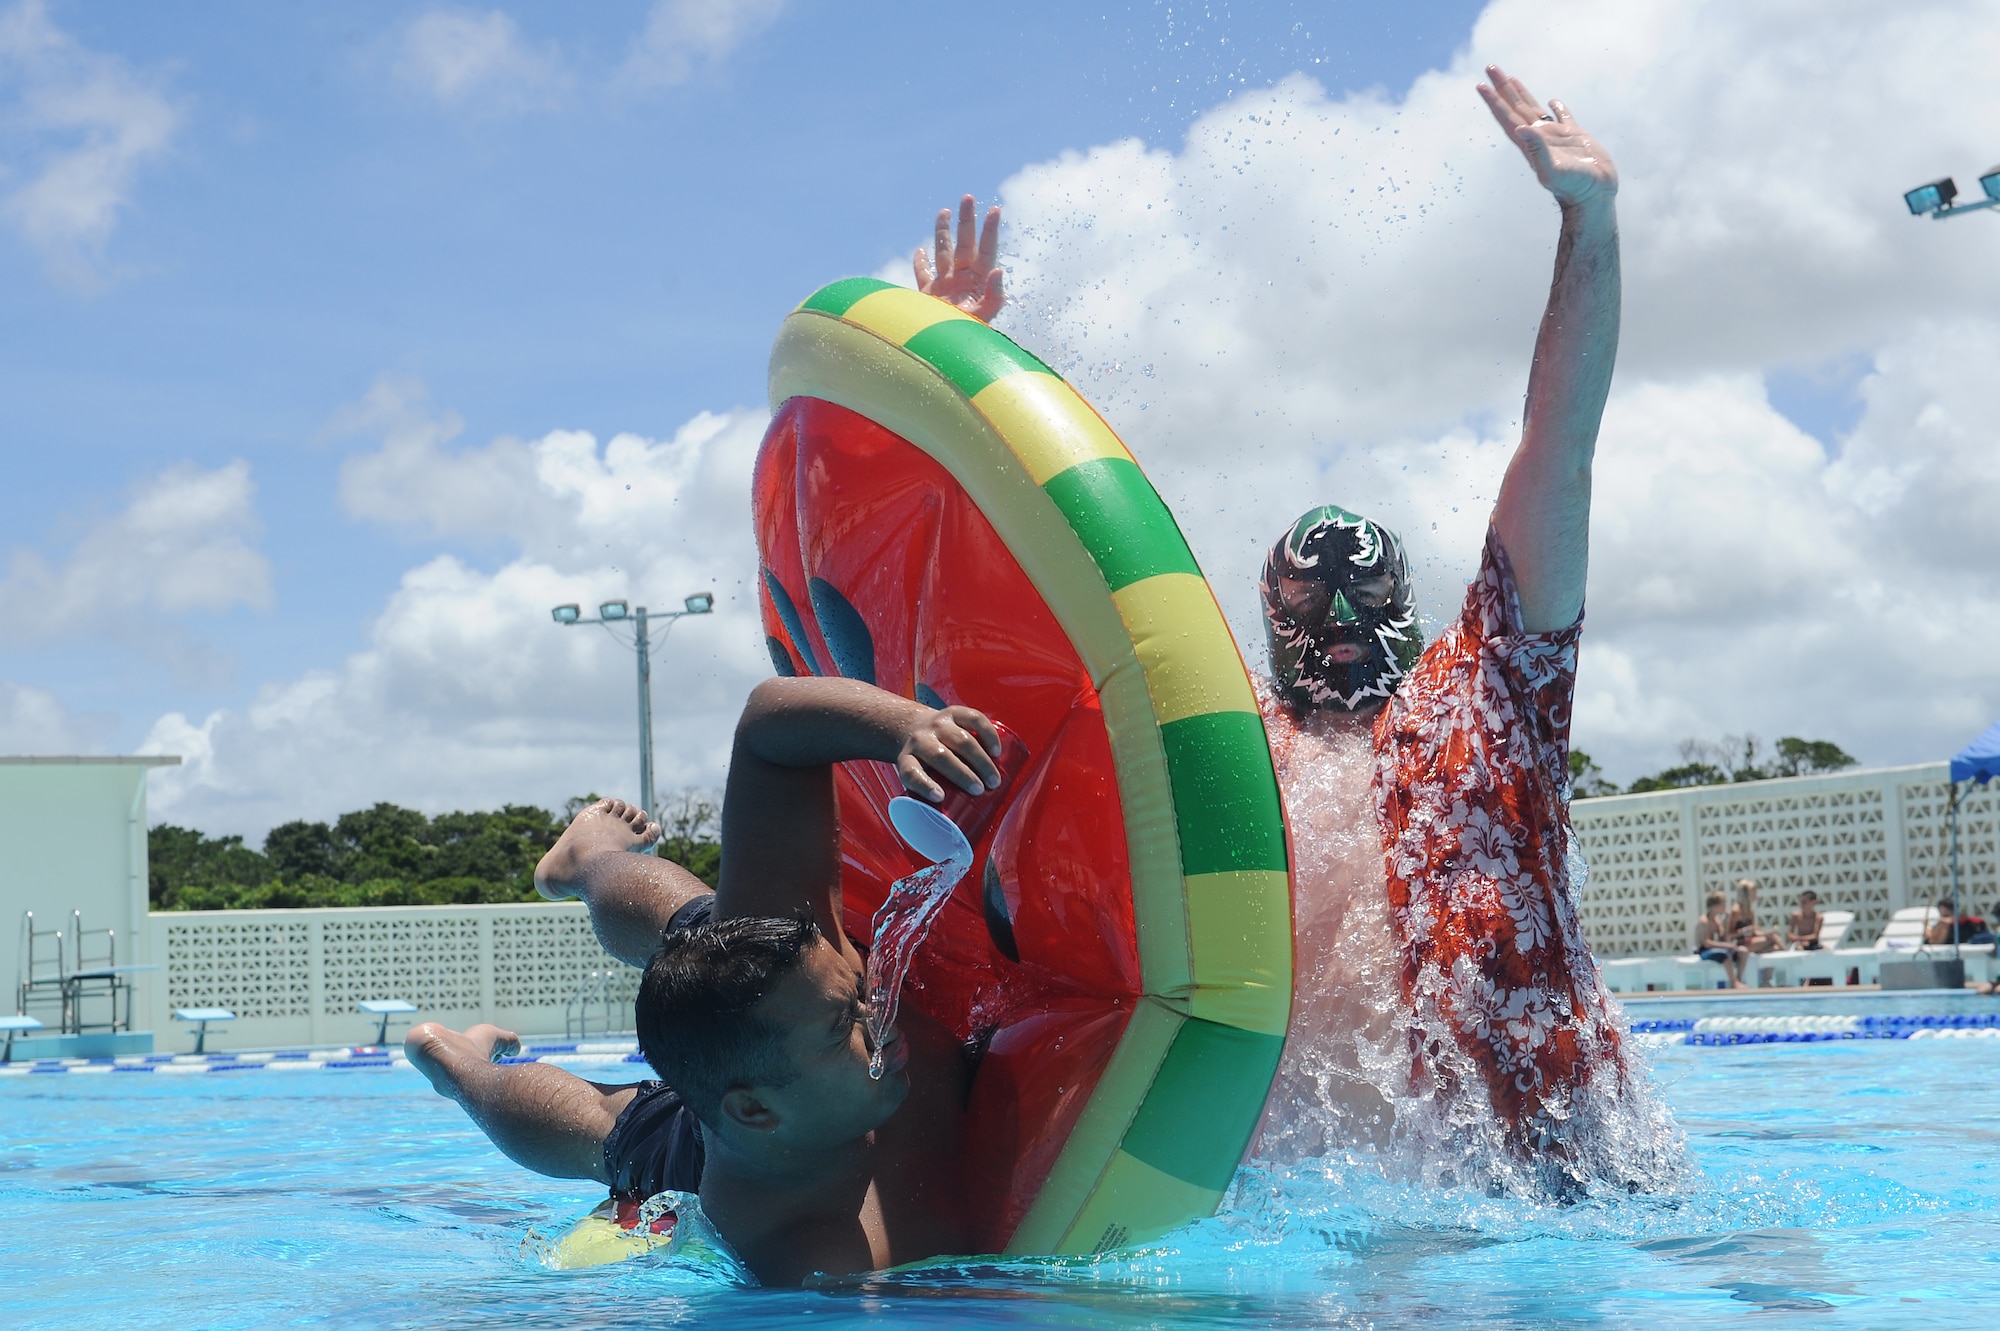 “Common Sense Lucha” helps an Airman make good choices while enjoying the summer sun at Kadena Air Base's Hagerstrom Pool, June 18, 2015. Alcohol numbs the senses and reduces reaction time, a combination which significantly increases the risk of drowning. If you plan to drink around water, be sure to practice personal risk management and always have a wingman. (U.S. Air Force photo by Airman 1st Class Zade C. Vadnais)

